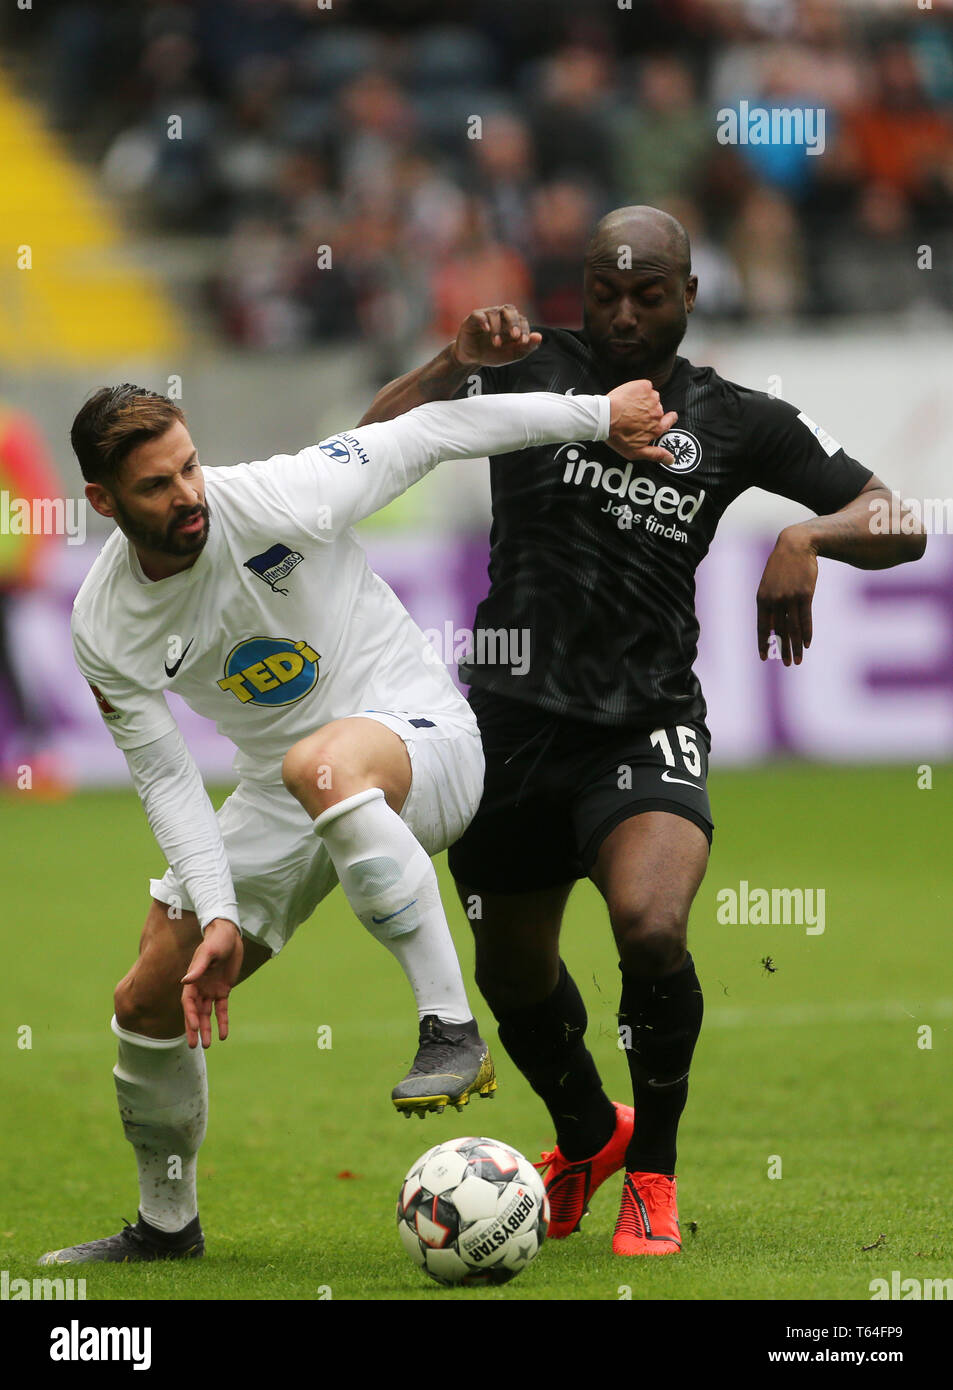 27 April 2019, Hessen, Frankfurt/M.: Soccer: Bundesliga, Eintracht Frankfurt - Hertha BSC, 31st matchday in the Commerzbank Arena. The Berlin Marvin Plattenhardt (l) and the Frankfurt Jetro Willems fight for the ball. Photo: Thomas Frey/dpa - IMPORTANT NOTE: In accordance with the requirements of the DFL Deutsche Fußball Liga or the DFB Deutscher Fußball-Bund, it is prohibited to use or have used photographs taken in the stadium and/or the match in the form of sequence images and/or video-like photo sequences. Stock Photo